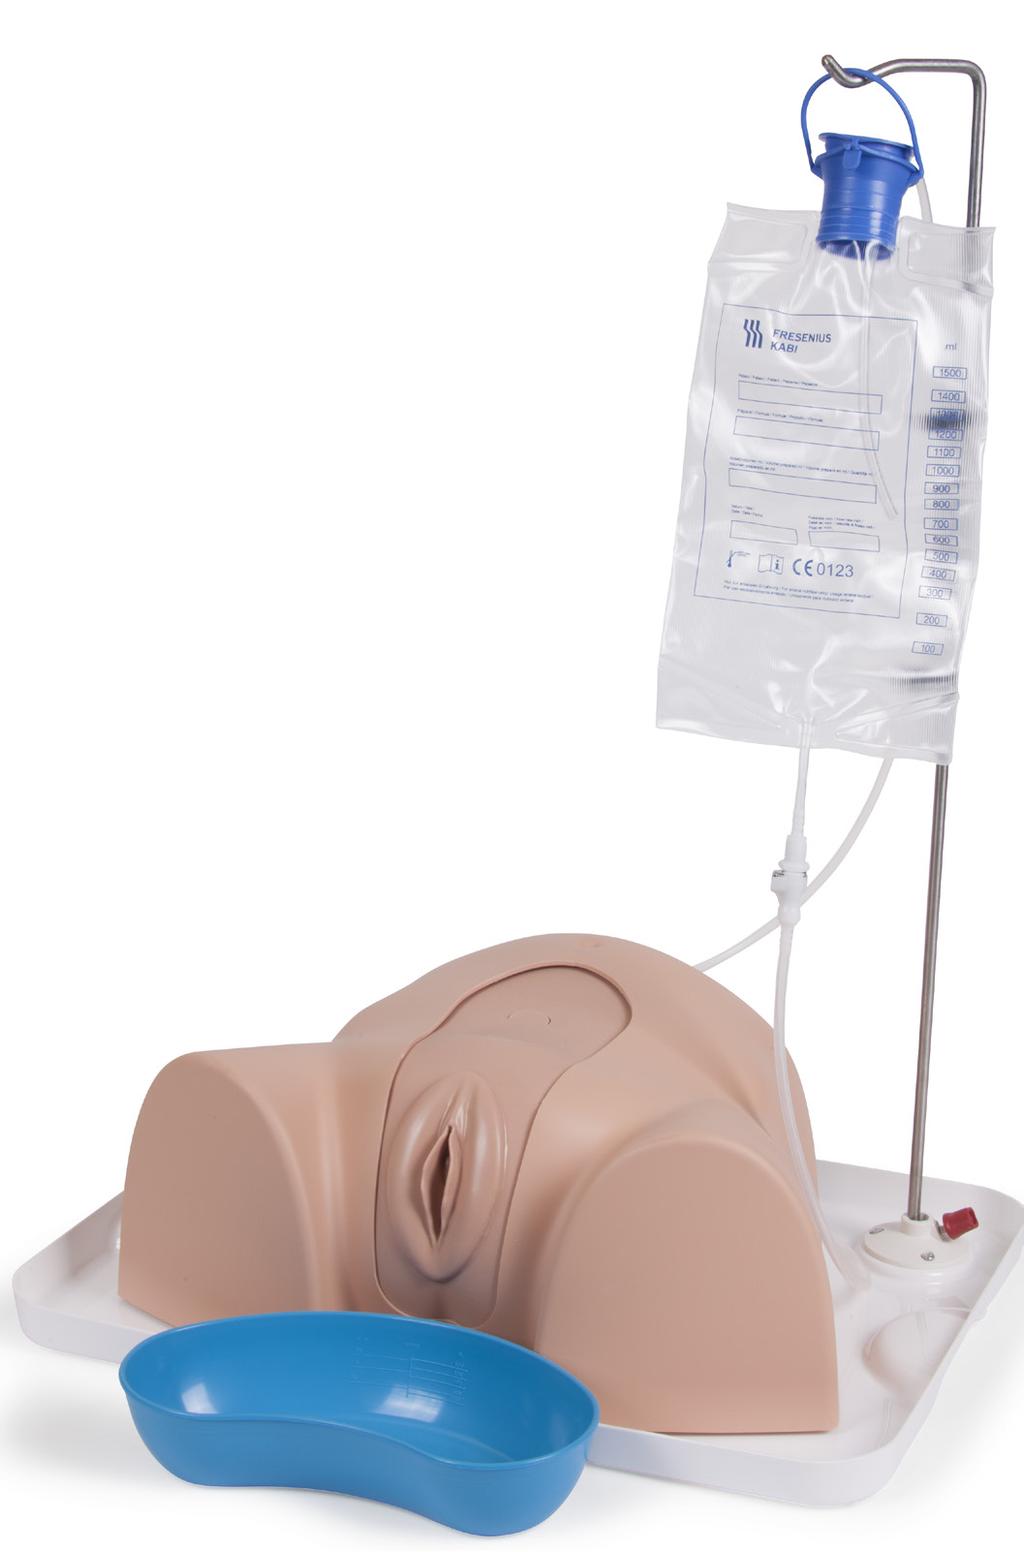 Advanced Female Catheterisation Trainer Product No: 60155 User Guide For more skills training products visit